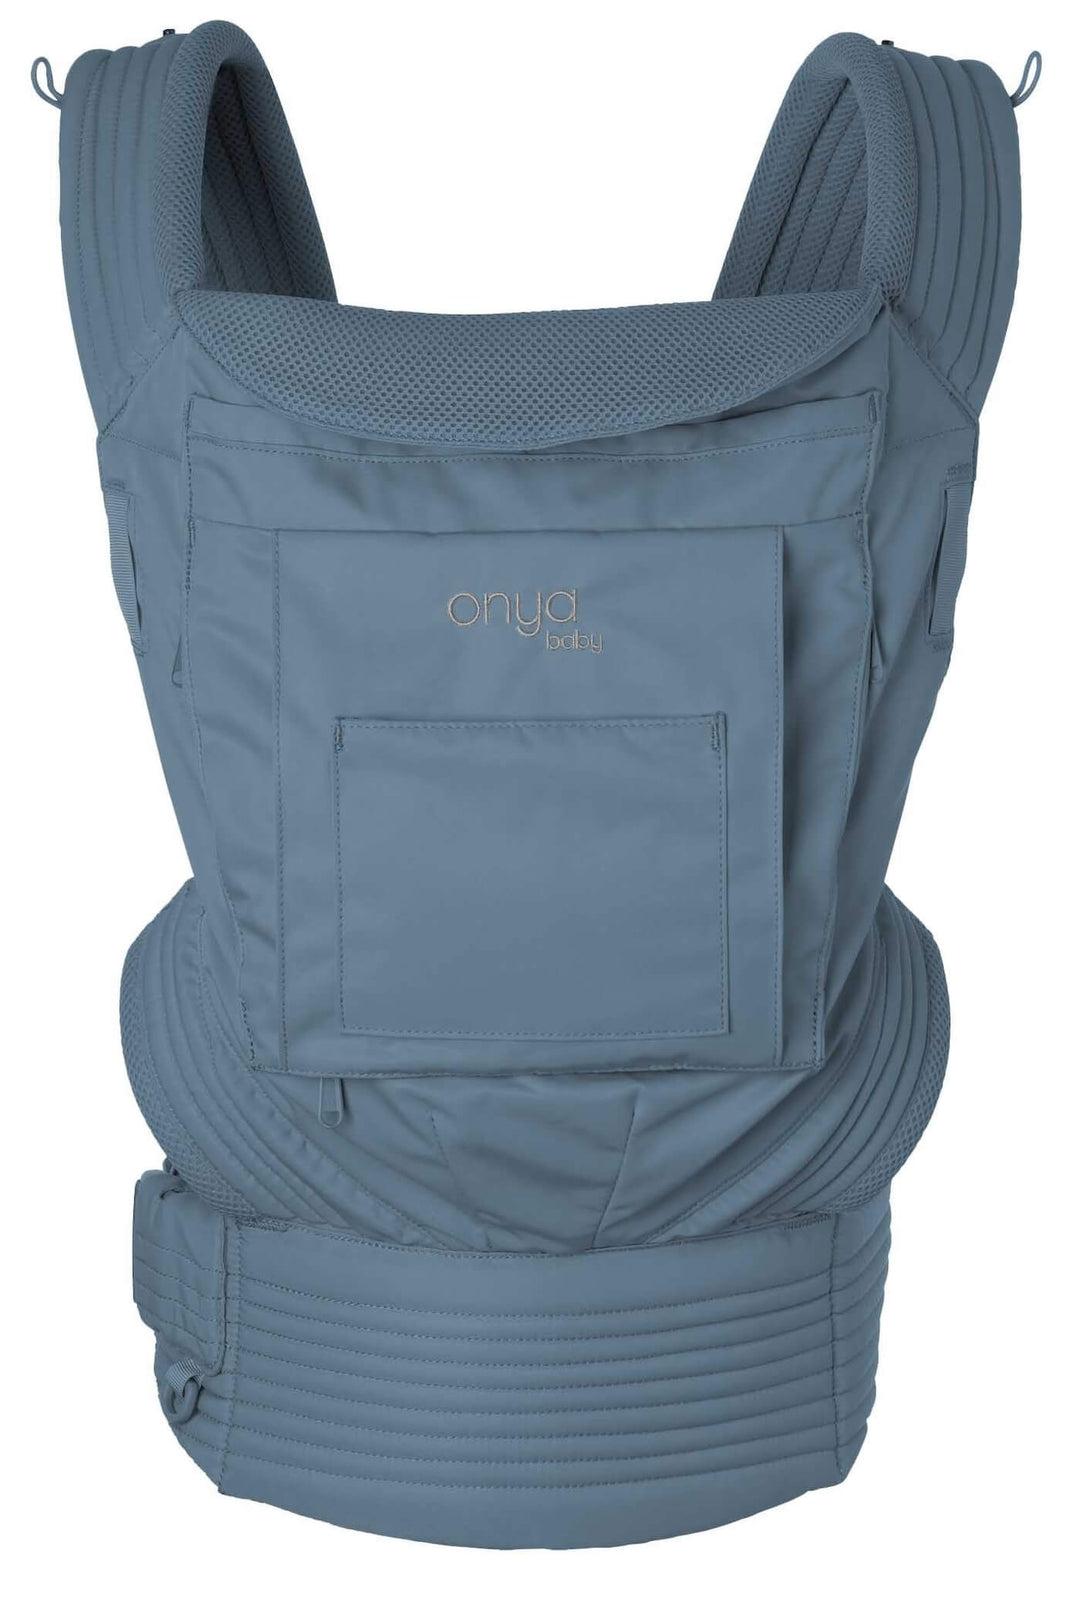 Front View of Neptune Colored Nexstep Baby Carrier by Onya Baby